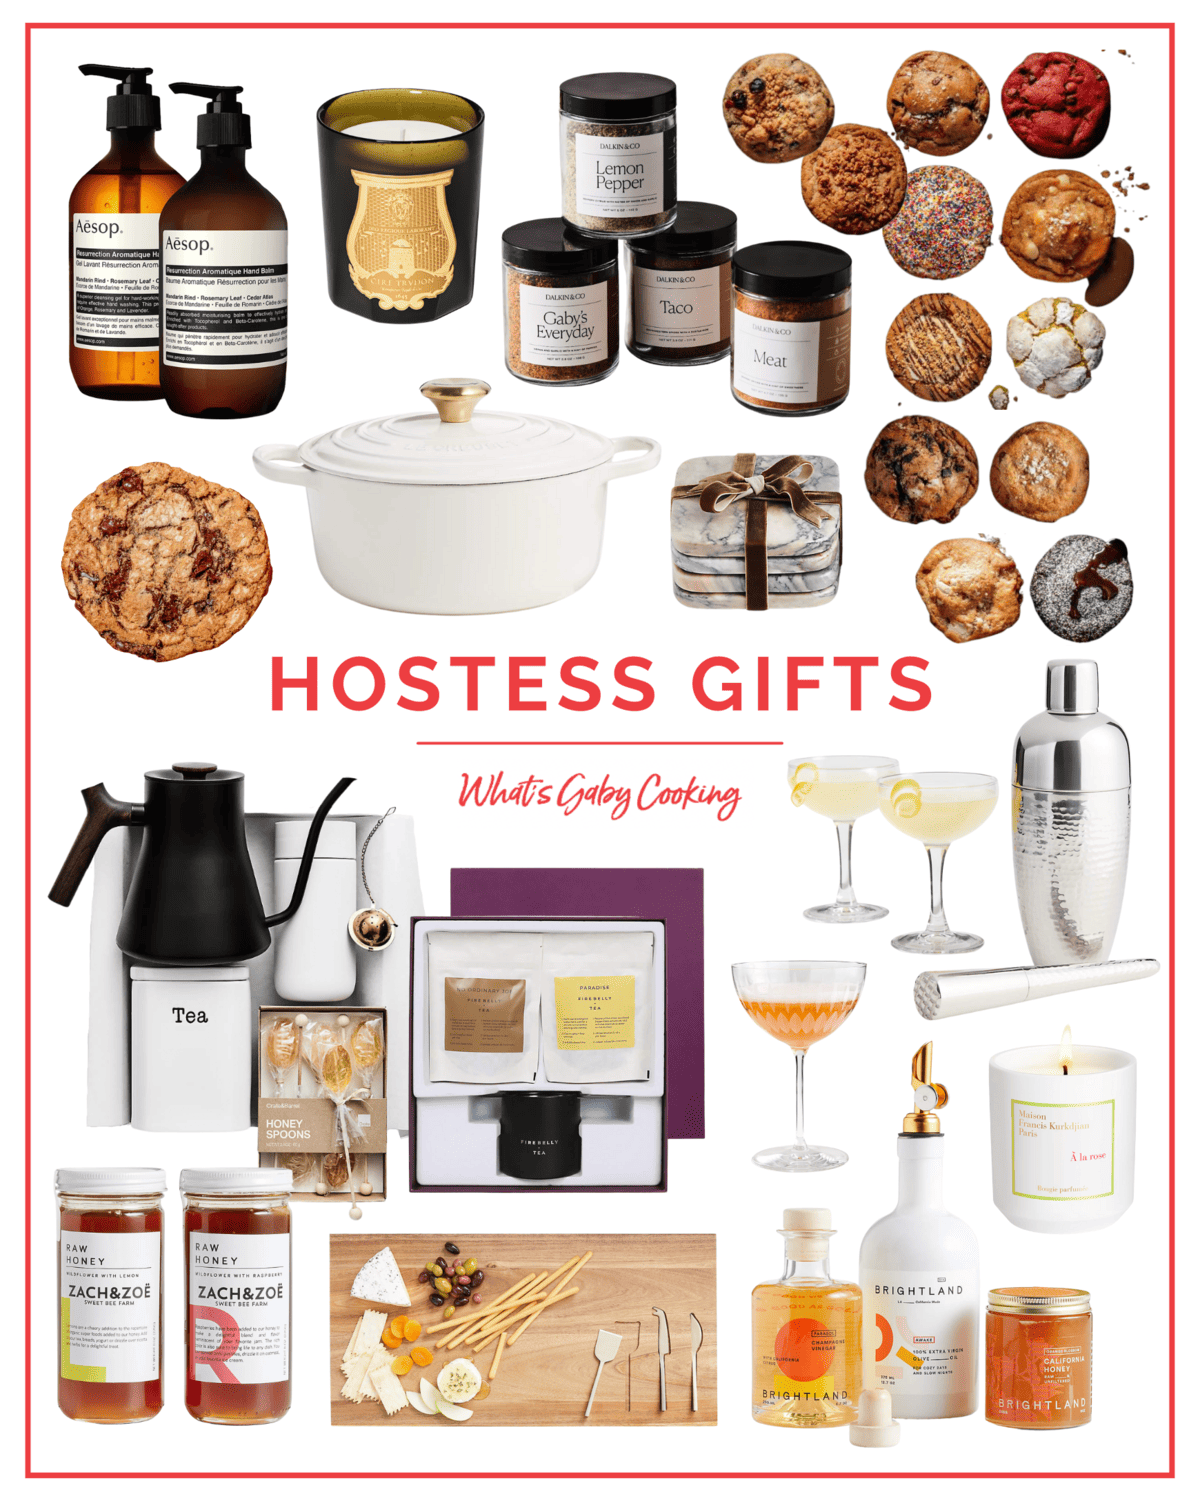 Women's Food And Kitchen Gift Guide: The Ultimate List - Recipes